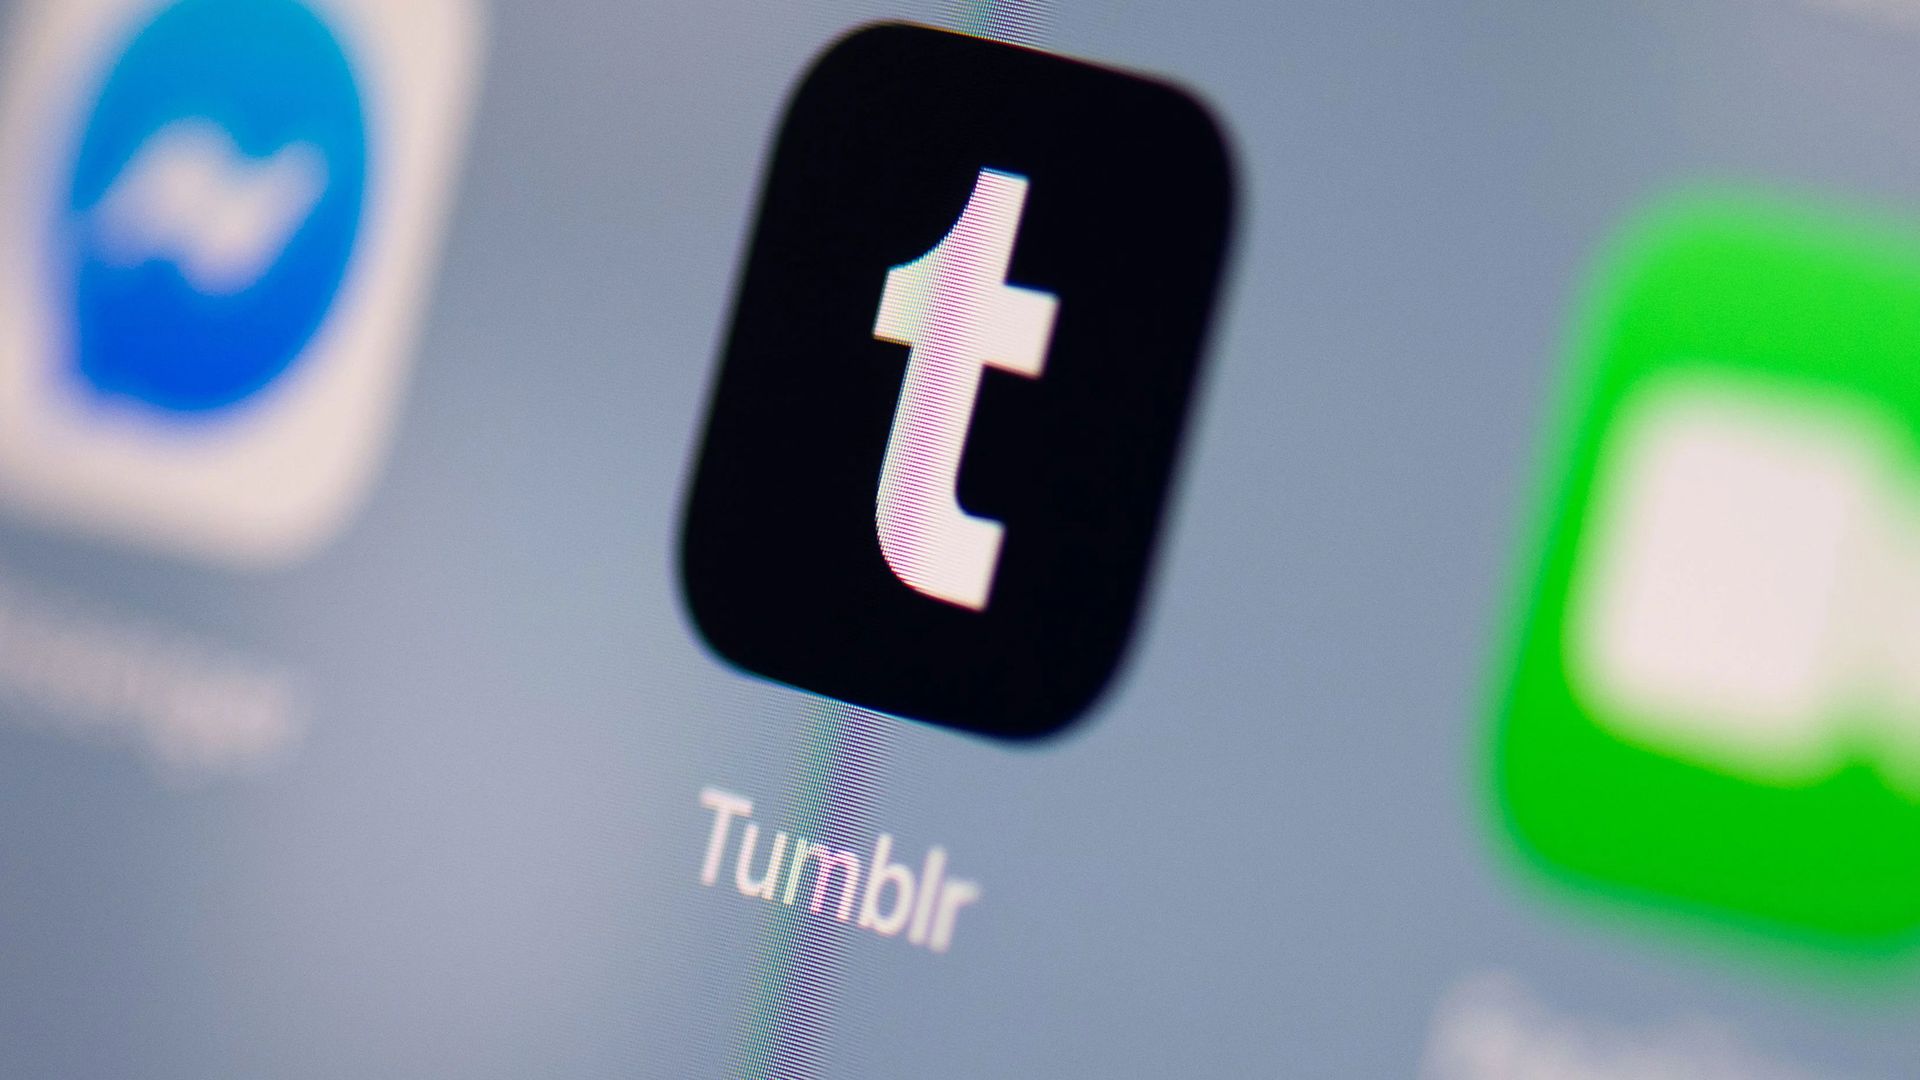 Tumblr not working: How to fix it (iOS, Android and PC)?